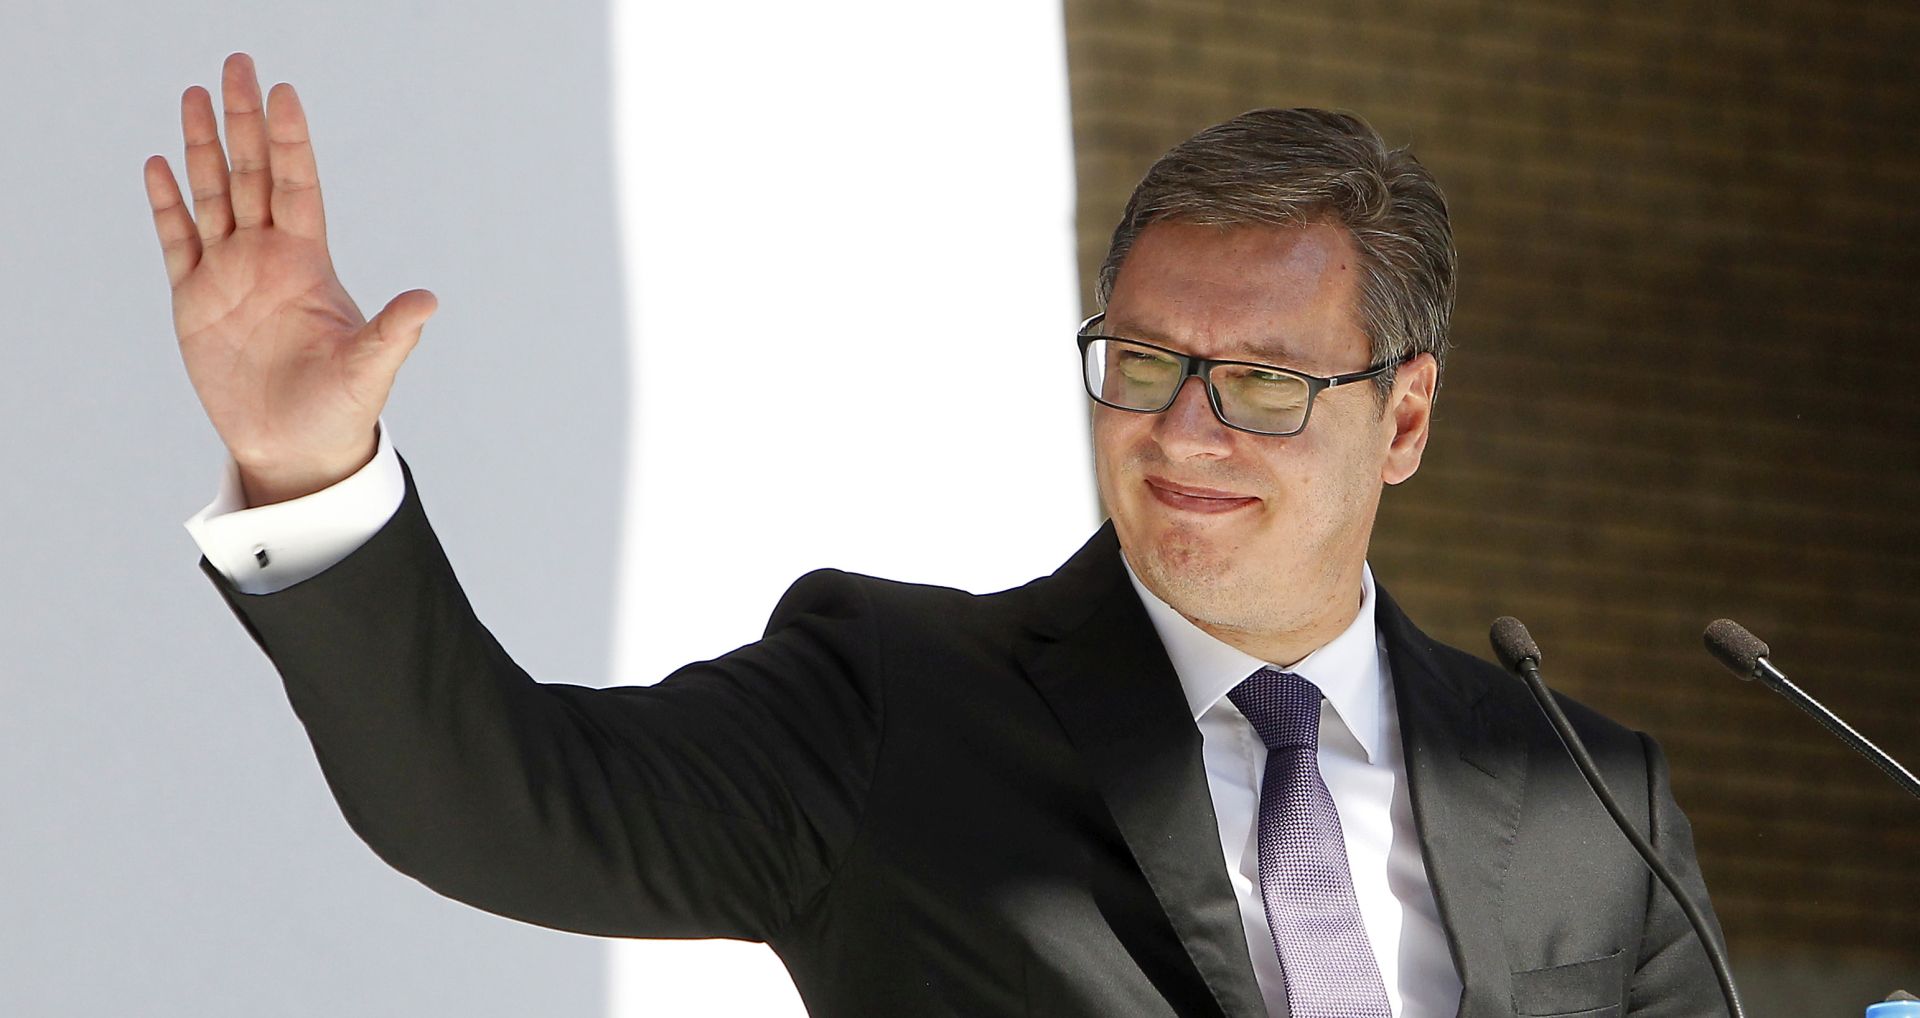 epa07007779 Serbian President Aleksandar Vucic gestures as he addresses supporters that gathered in the city center during his visit in the northern, Serb-dominated part of Mitrovica, Kosovo, 09 September 2018. Vucic is in Kosovo on a two-day visit.  EPA/DJORDJE SAVIC